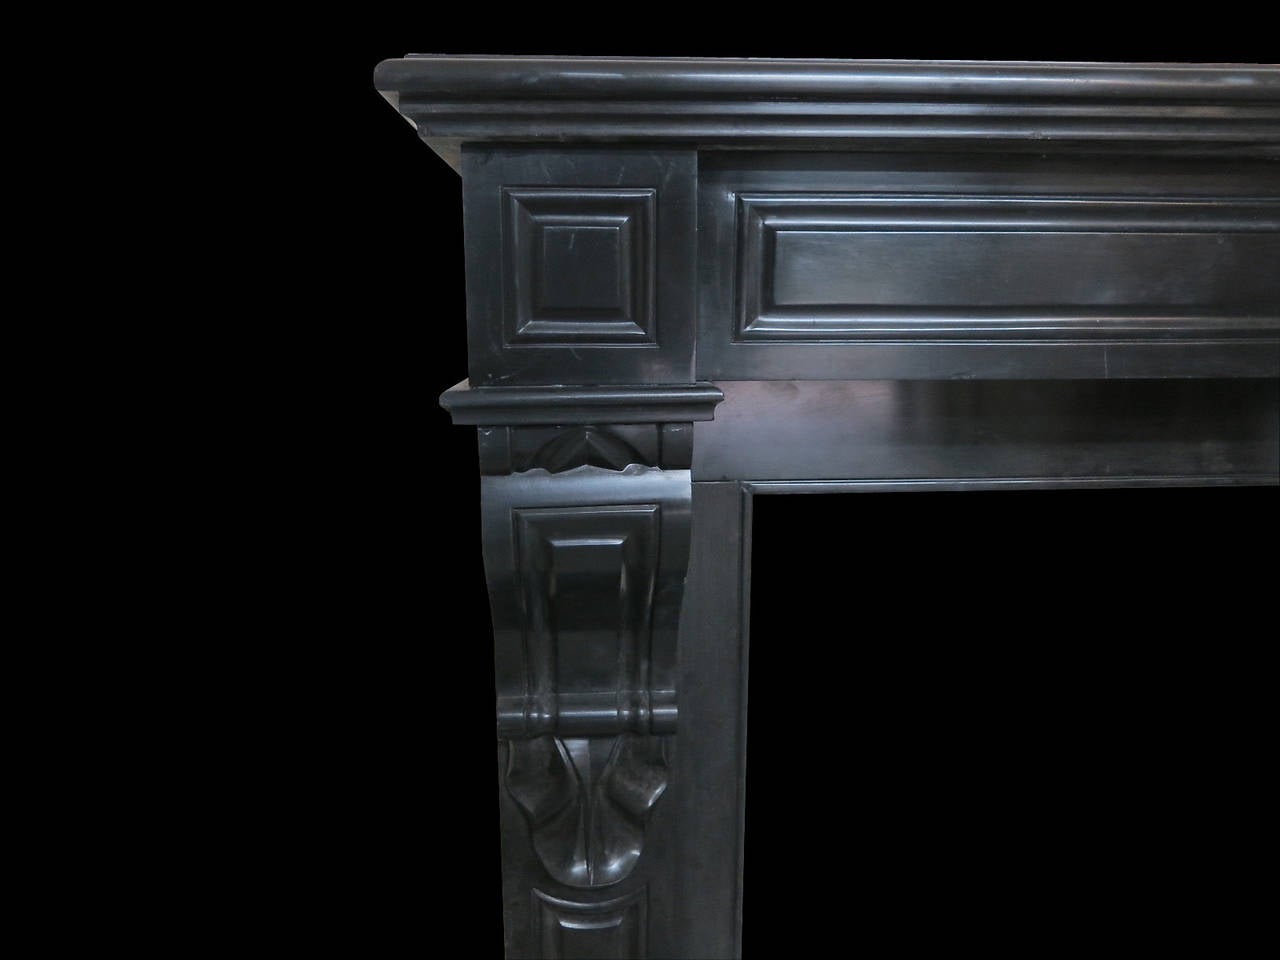 A petit and compact Louis XVI style fireplace in Belgian black marble. The paneled jambs surmounted by carved shells and paneled brackets. The conforming paneled frieze with square paneled corner blocks, all beneath a moulded and tiered shelf.